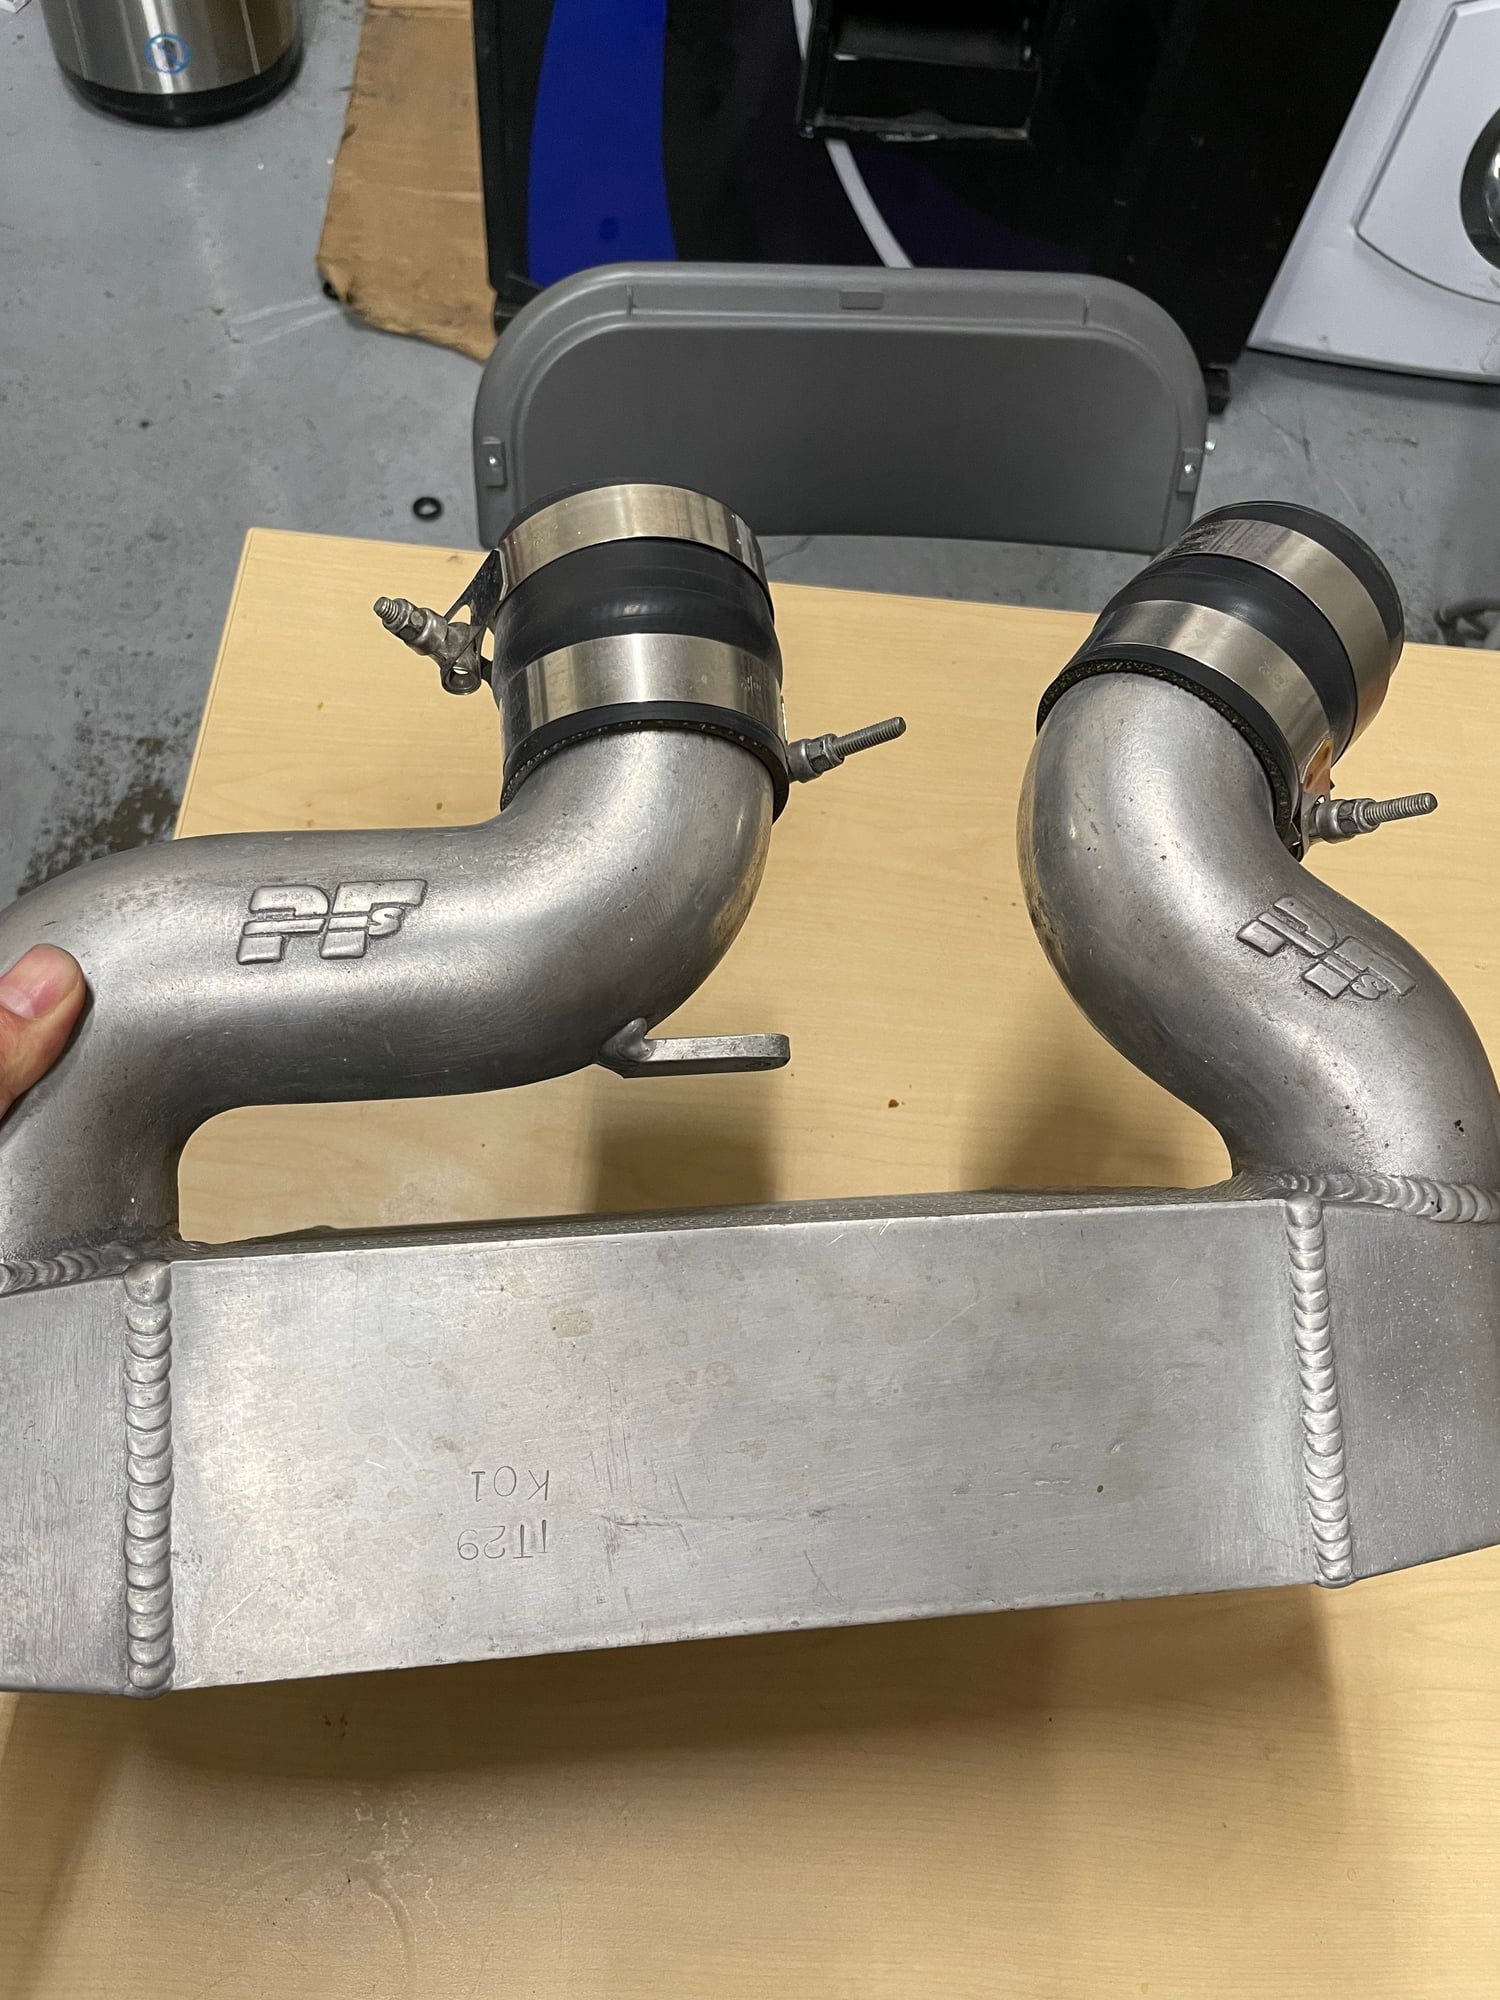 Engine - Intake/Fuel - PFS Intercooler and duct - Used - 1993 to 2002 Mazda RX-7 - Fremont, CA 94538, United States